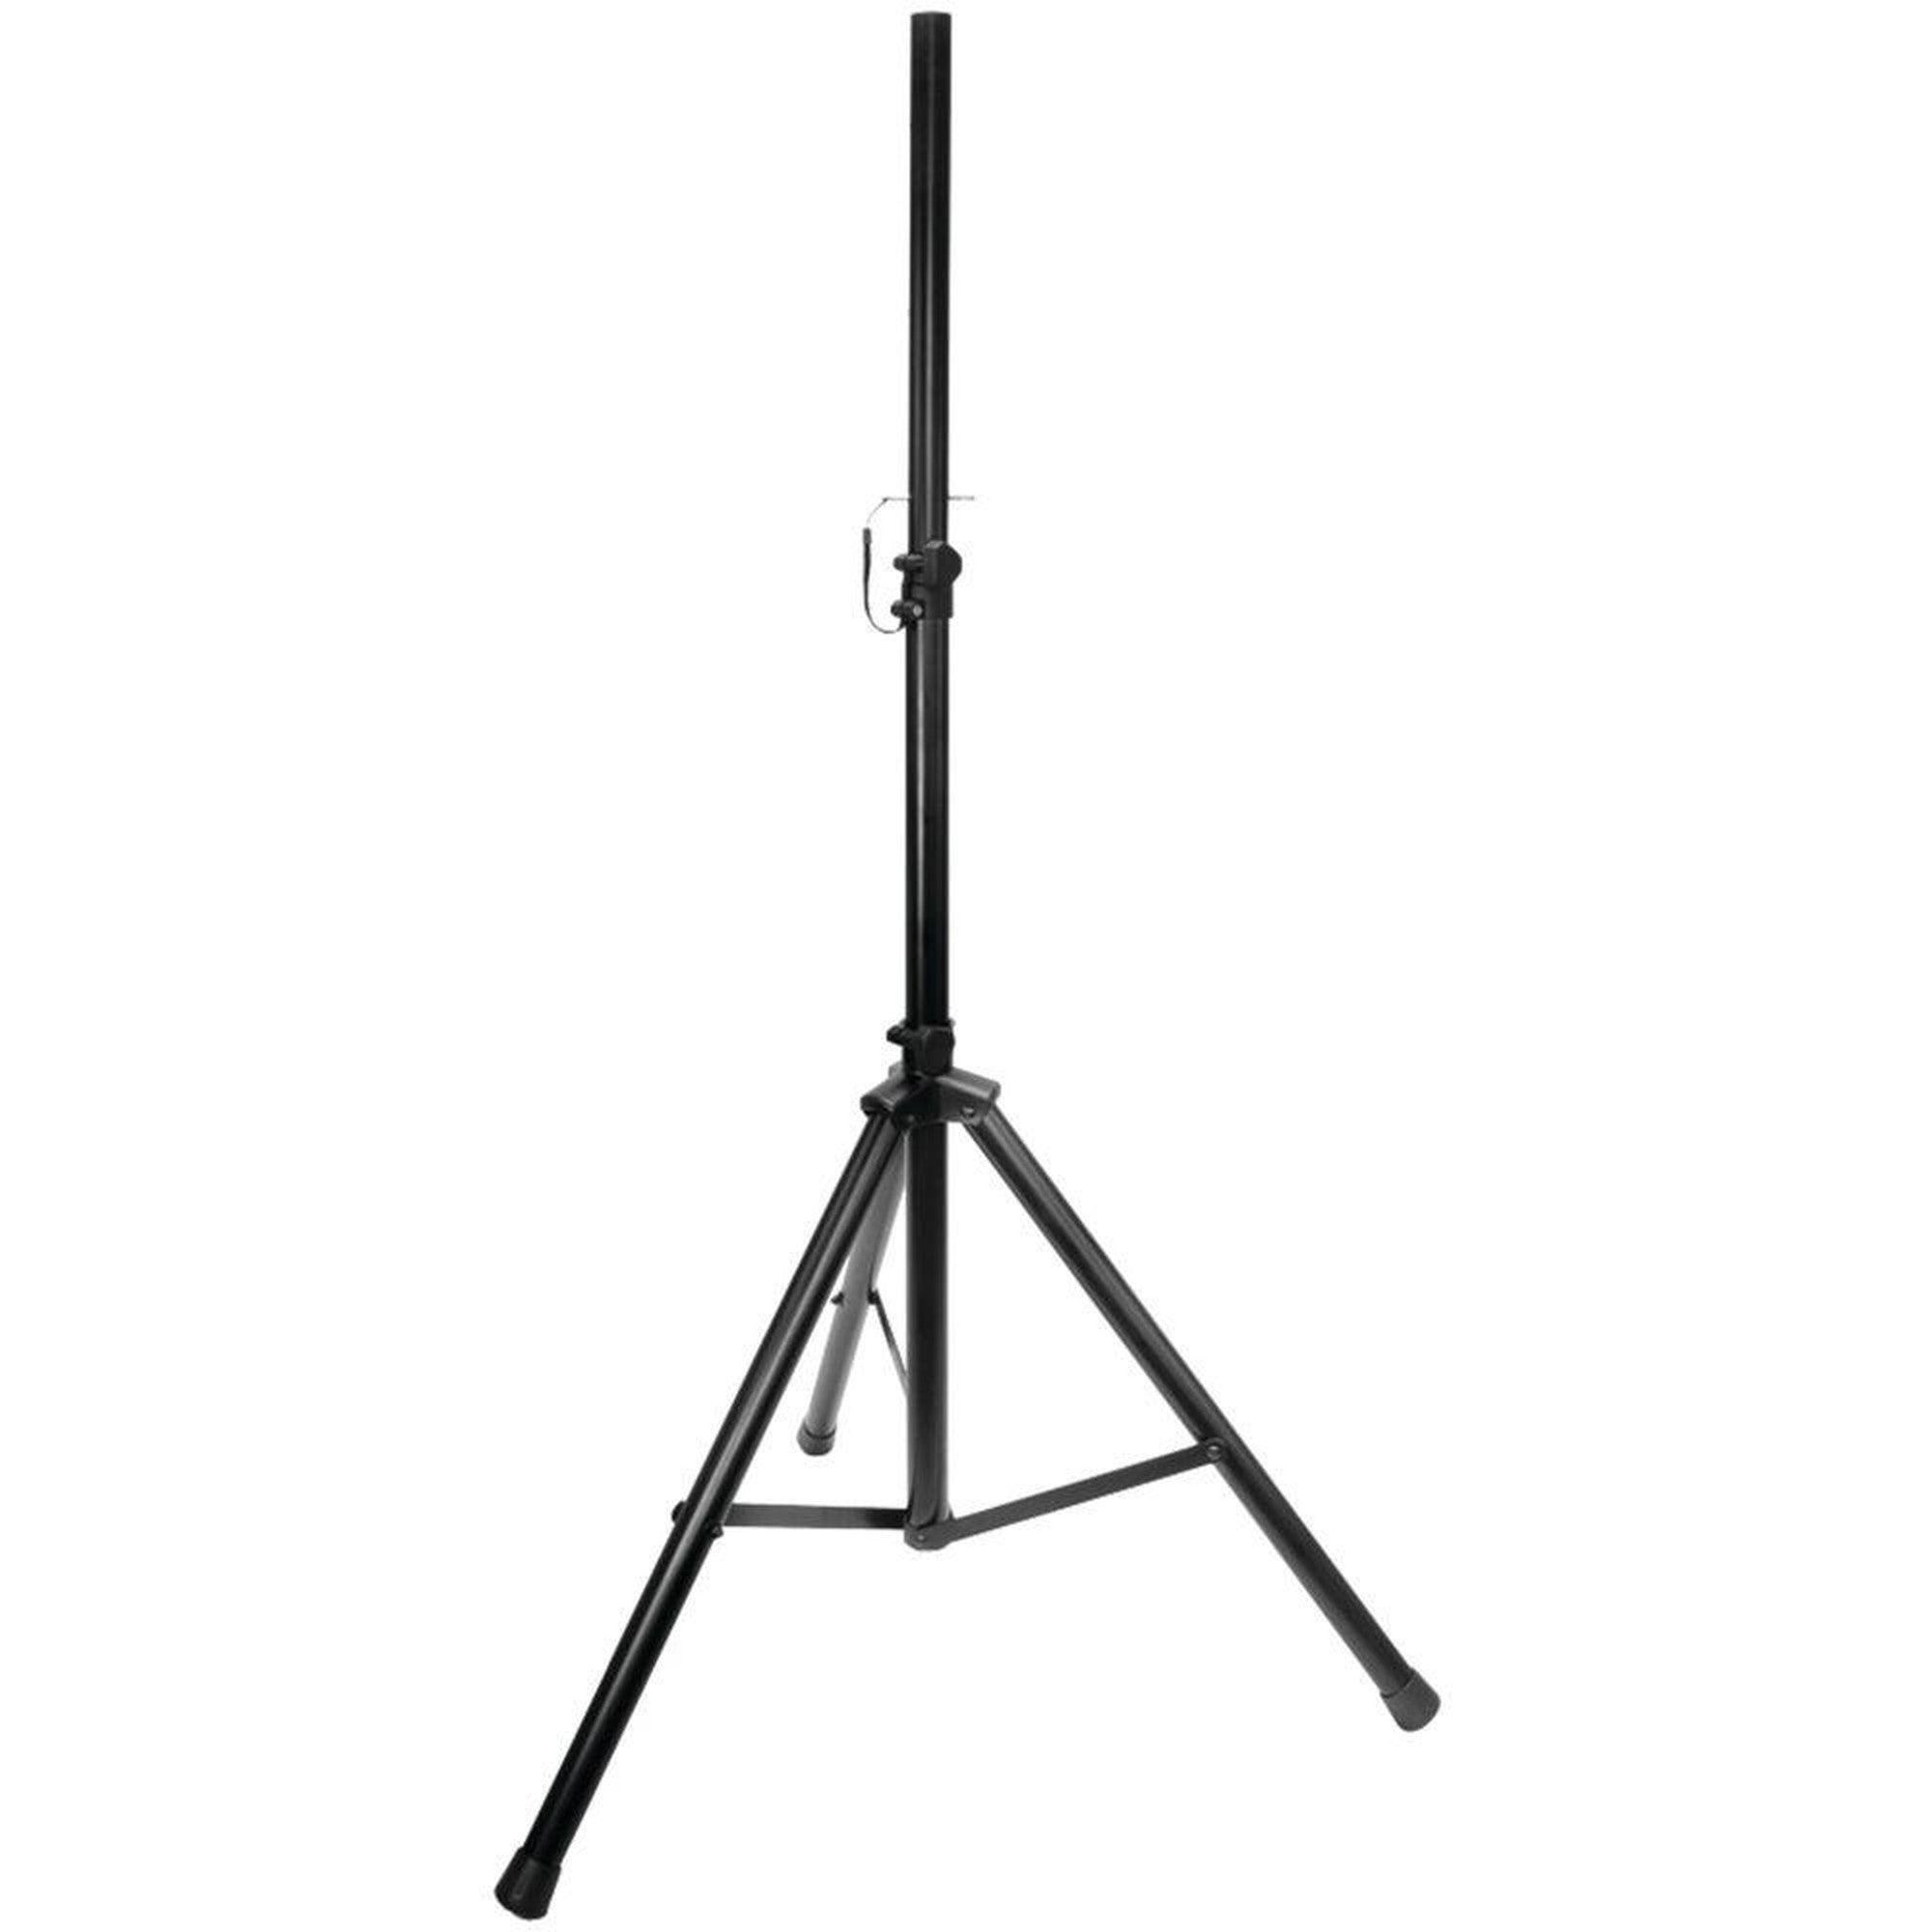 Dolphin ST-200 Standard Speaker Stand Set with Adjustable Height